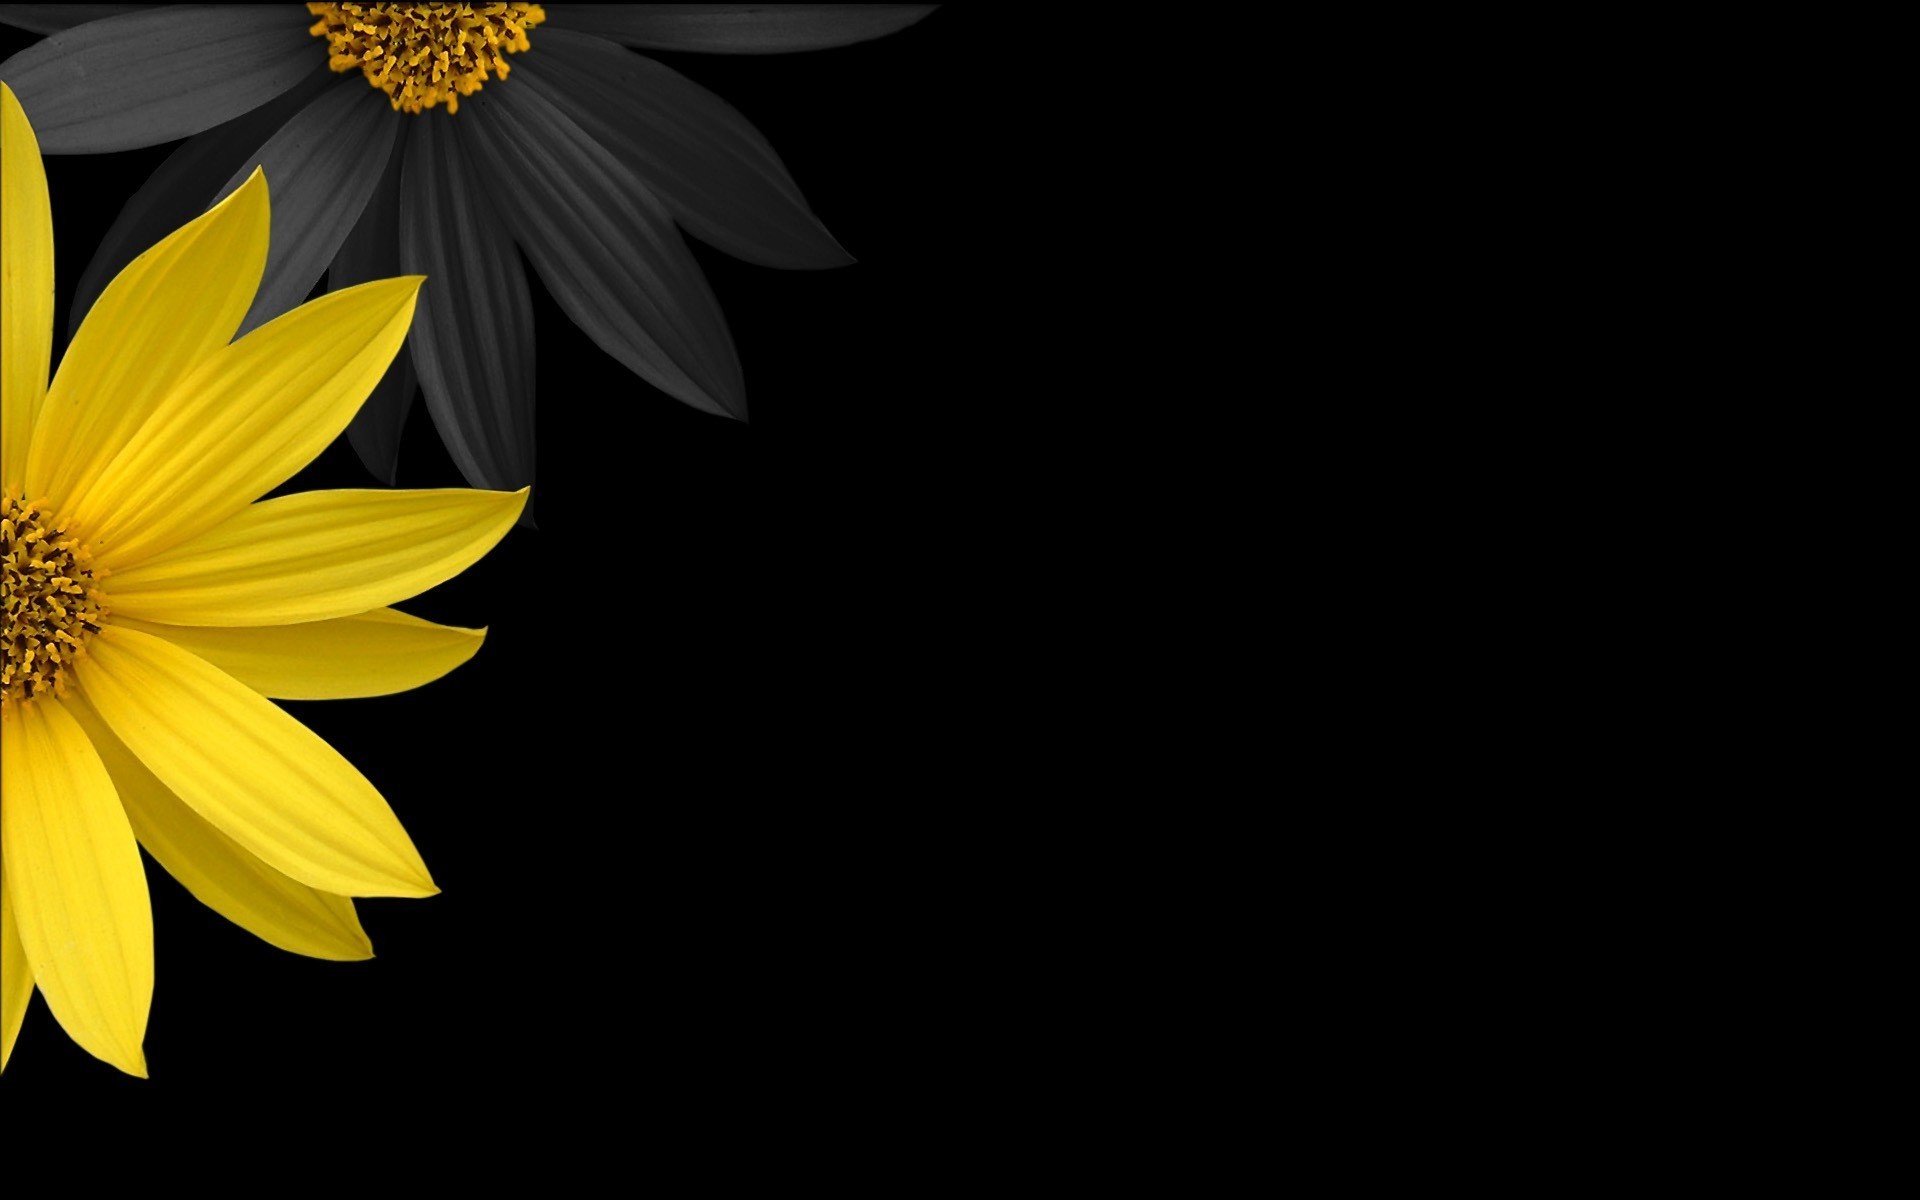 flowers, Yellow Flowers, Black Background Wallpapers HD ...
